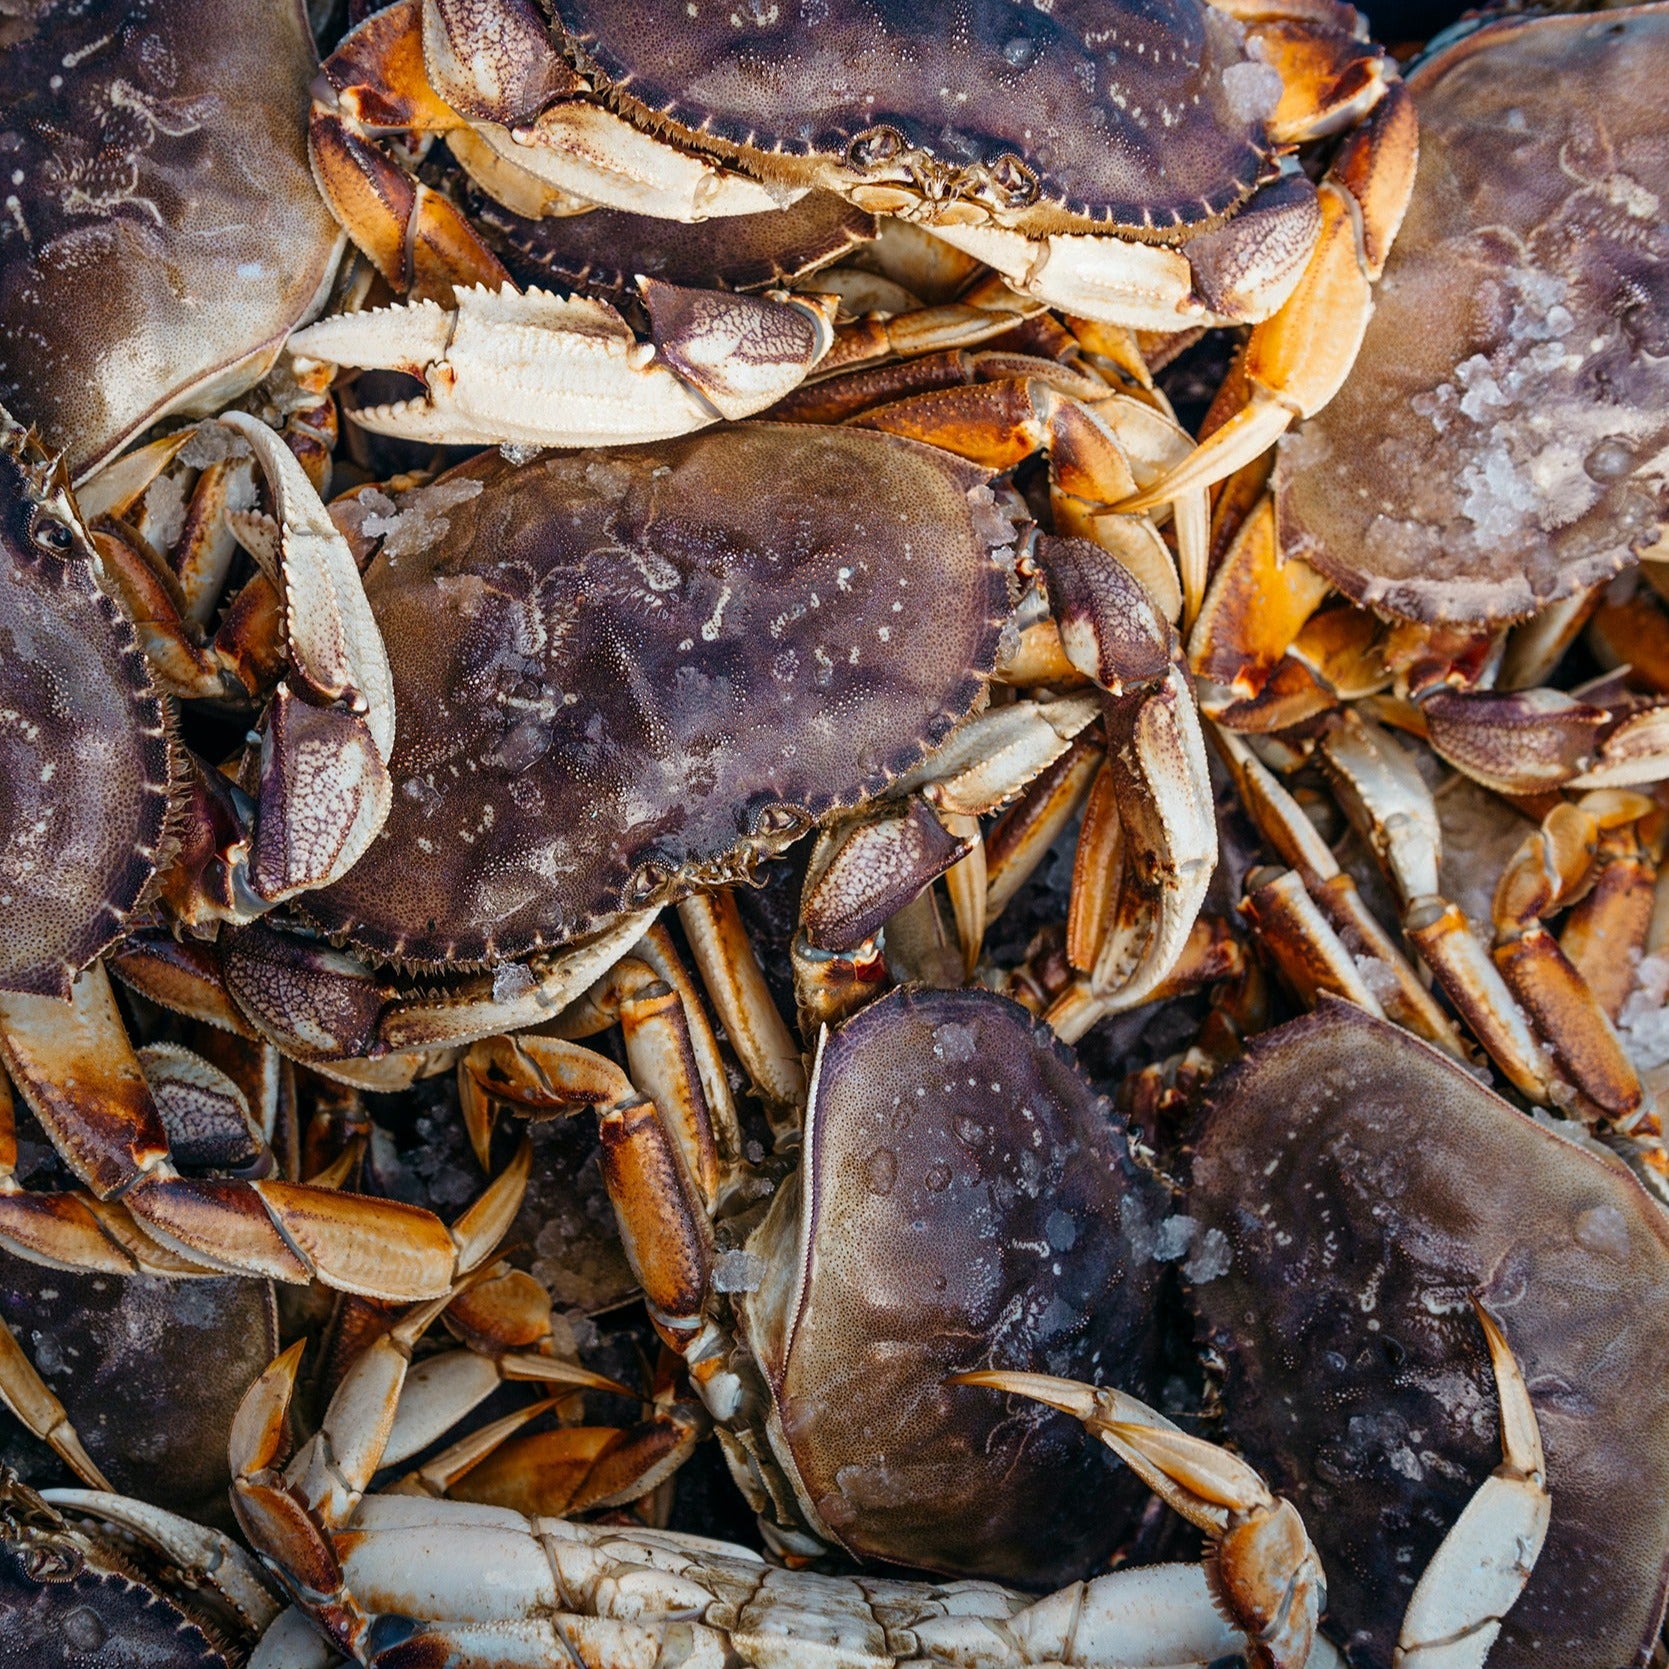 Local Dungeness Crab – Hog Island Oyster Co.